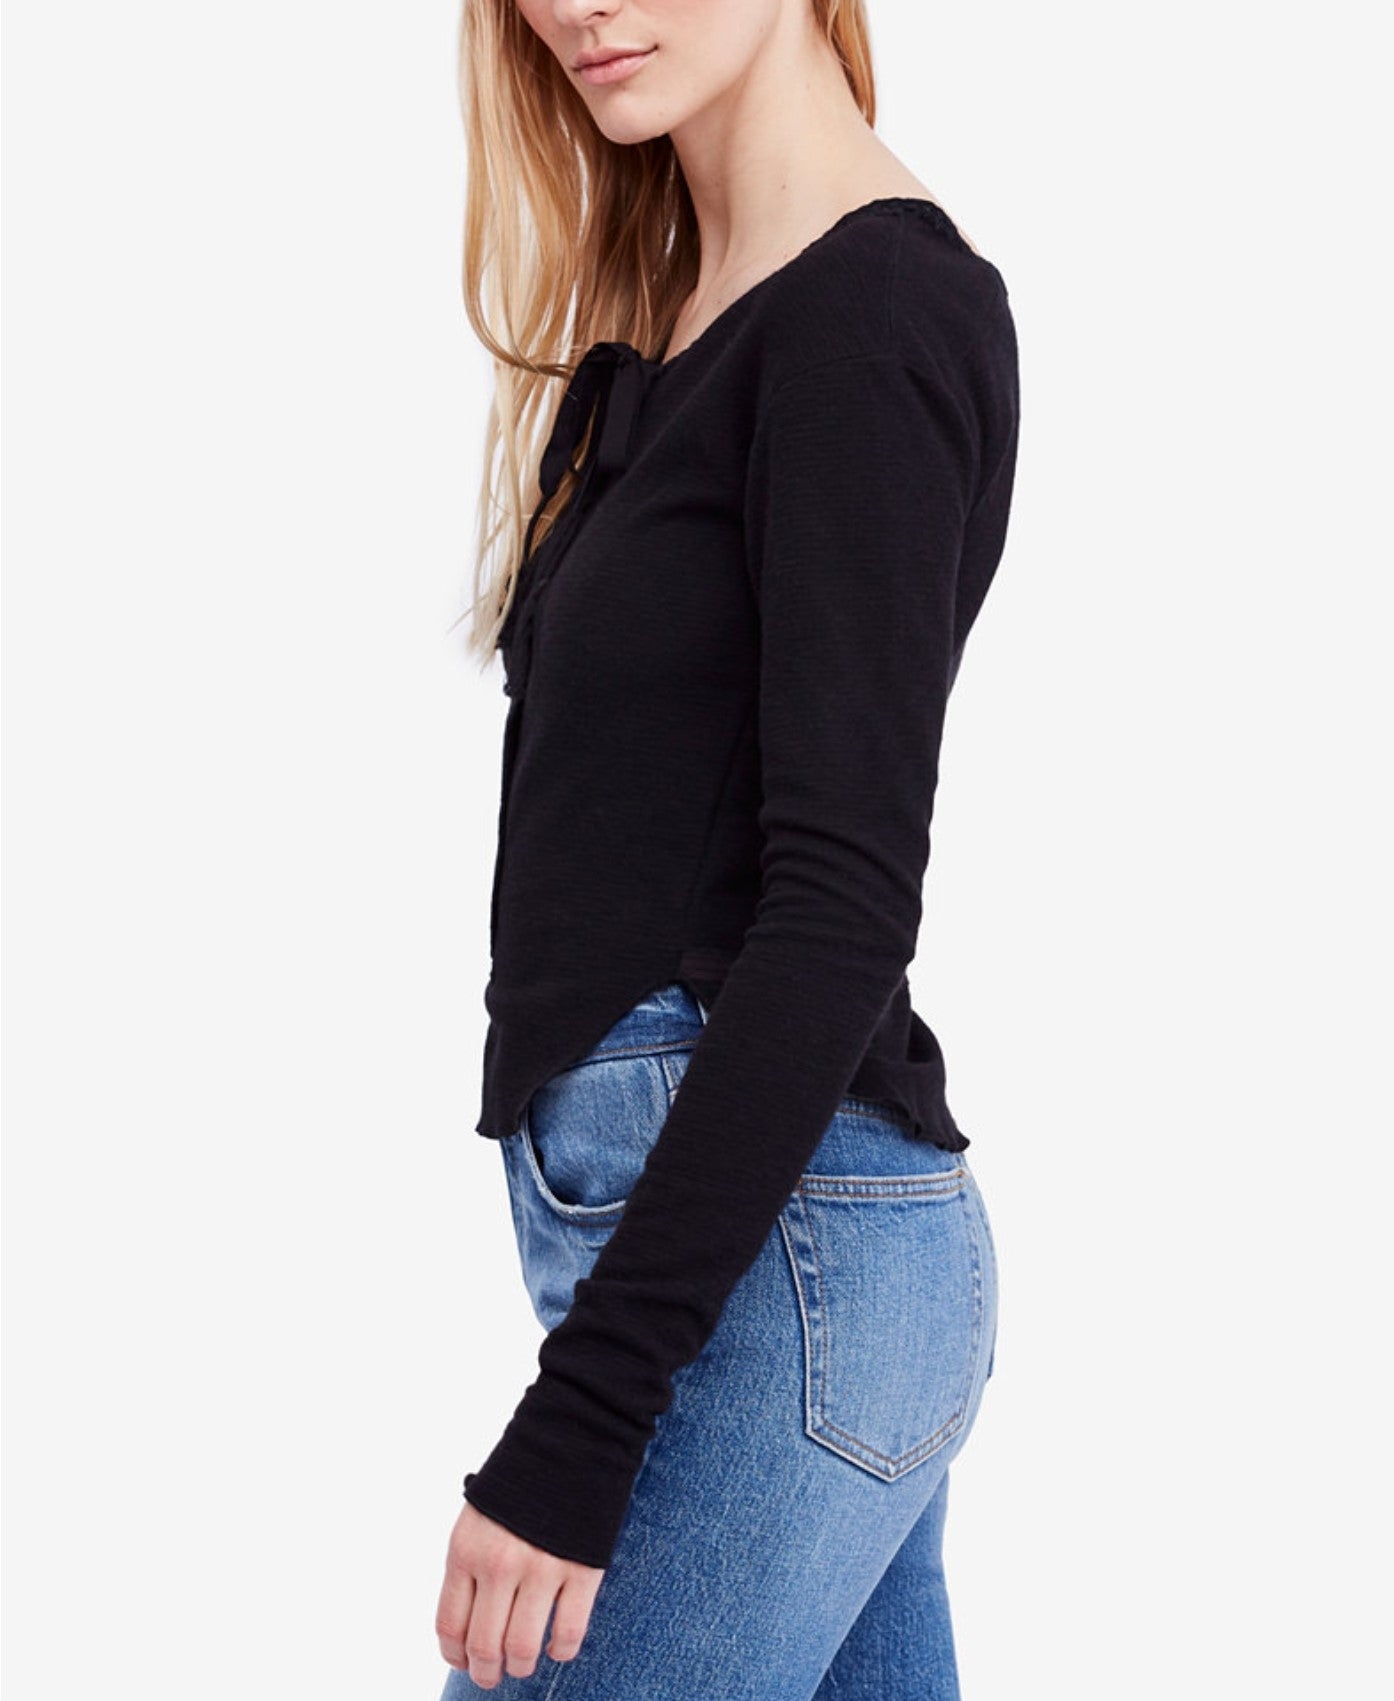 Free People Cecilia Tie-String Thermal Top